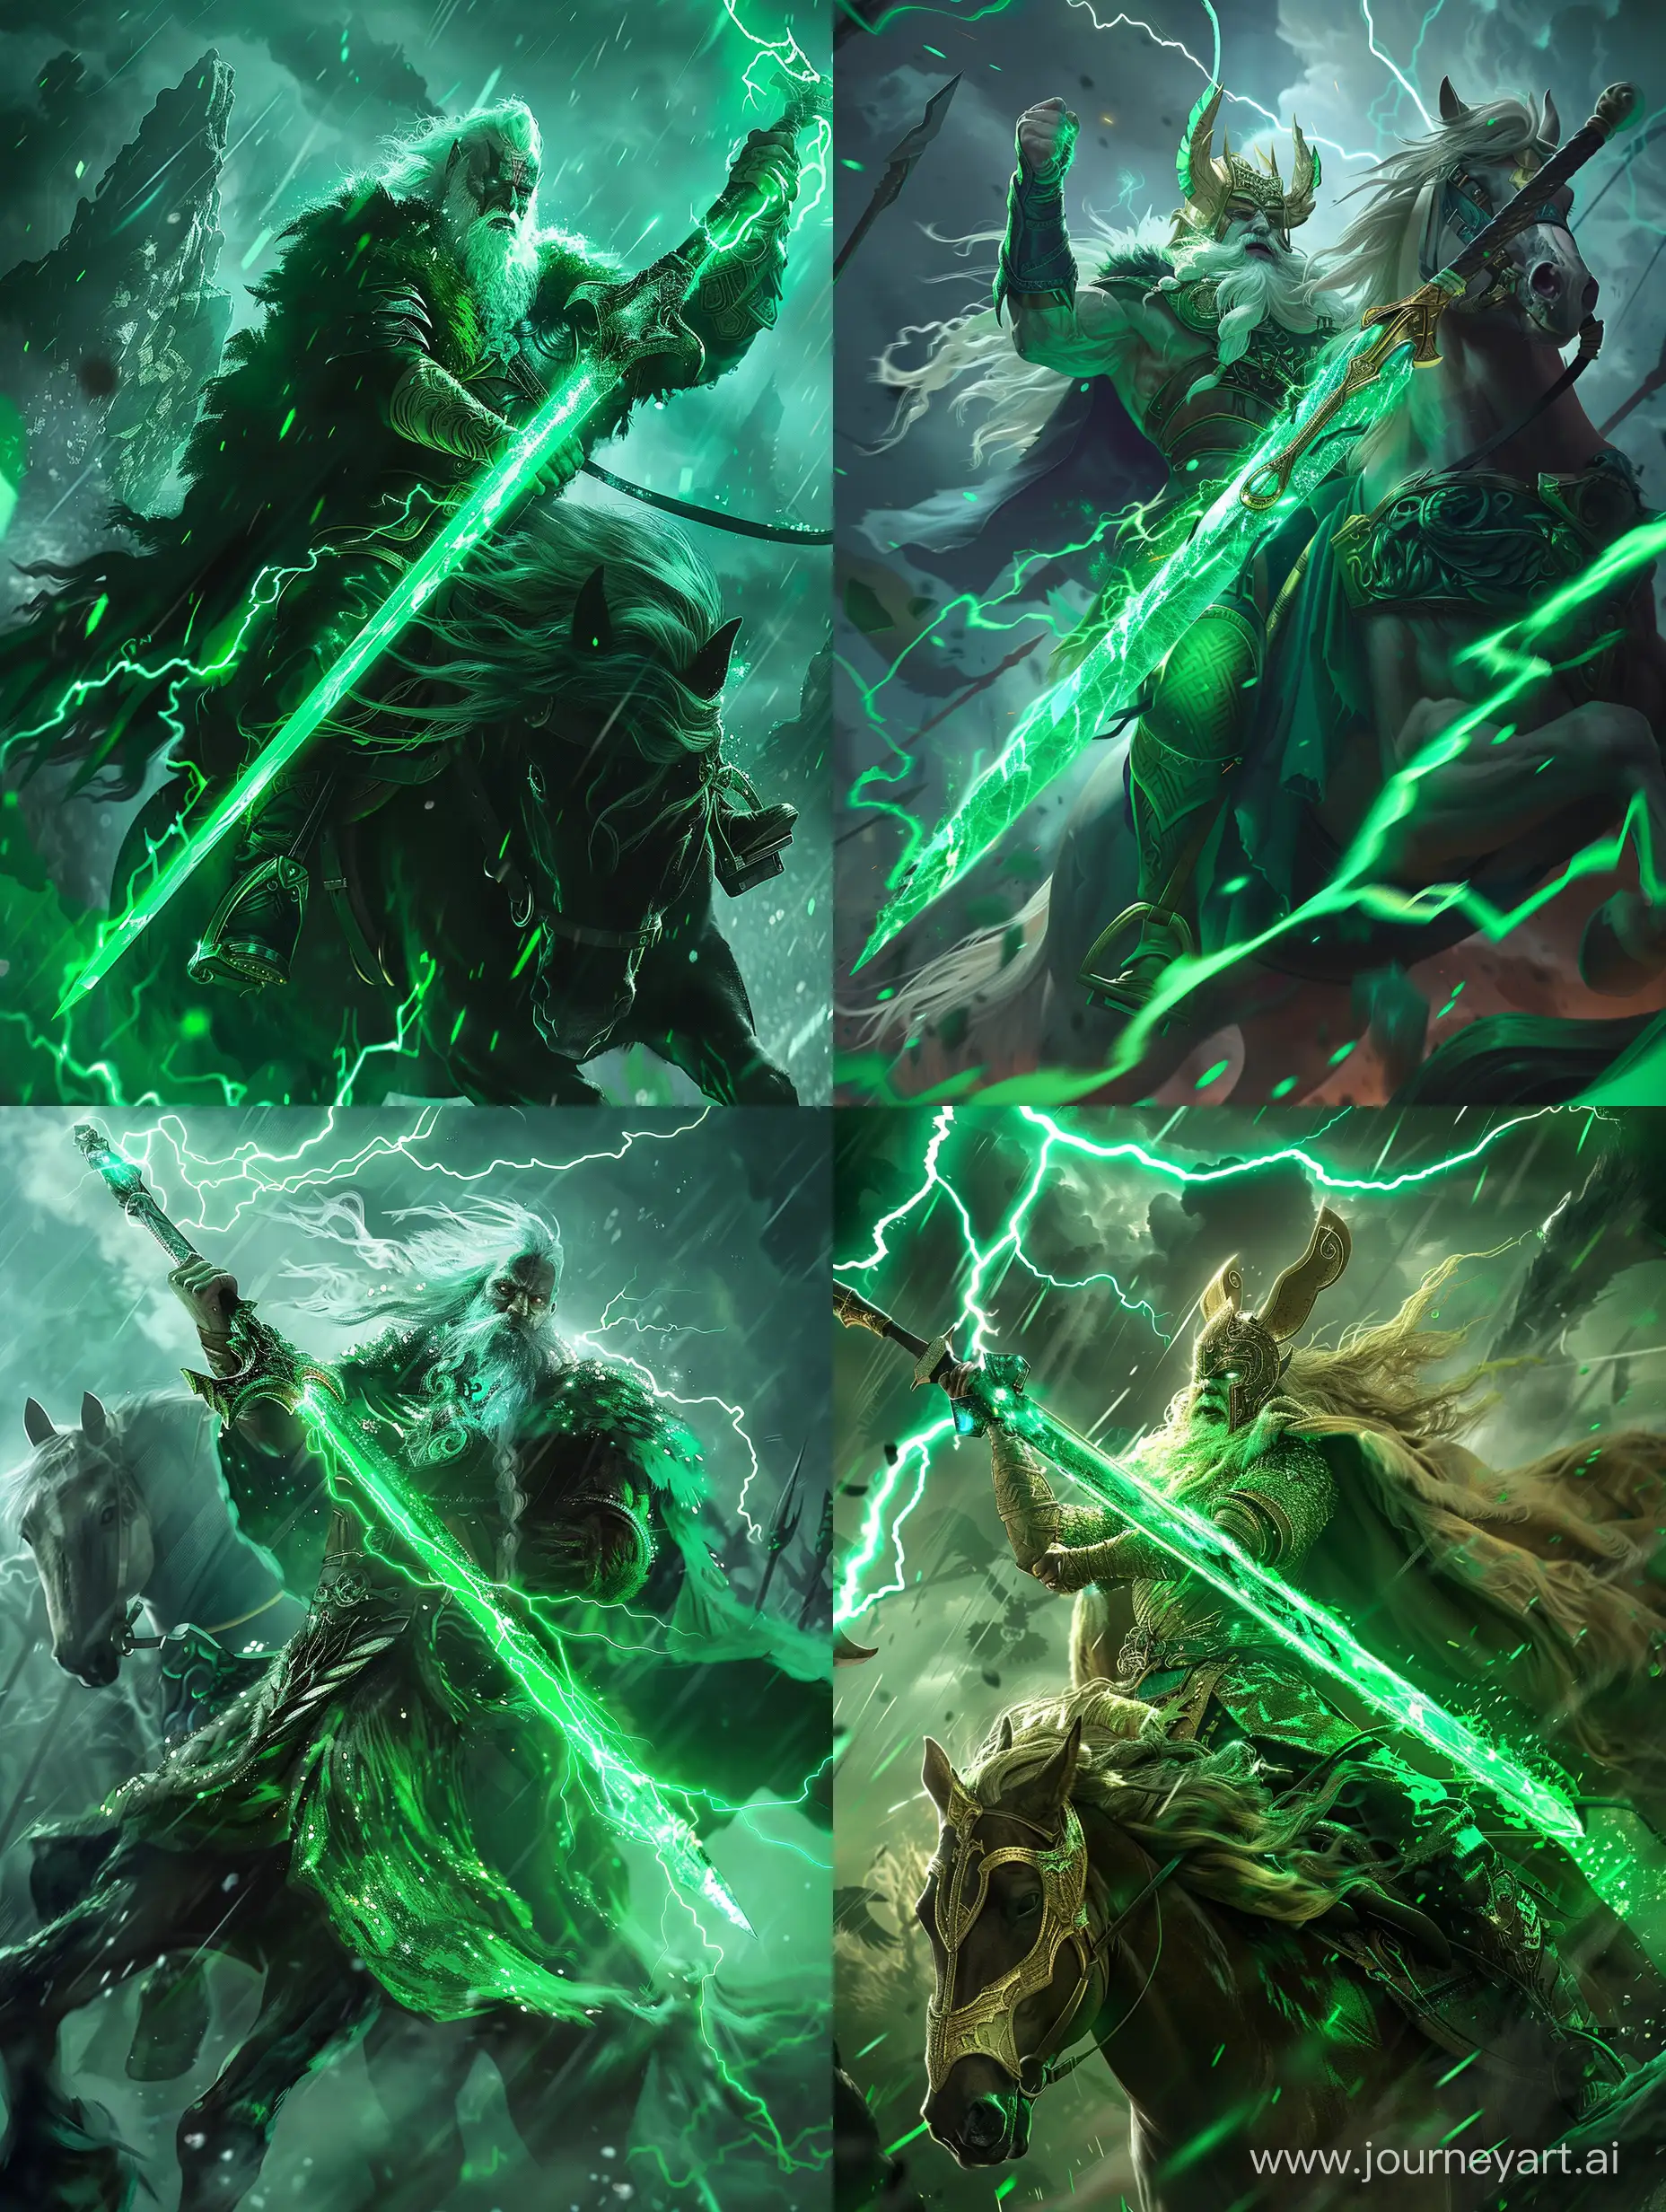 Odin wielding a sword made out of sparkling emerald, he is on horseback riding into battle in Valhalla, green lightning strikes the tip of his sword. 8K Quality. Anime Art Style. Beautiful. Ethereal. Modern Cartoon. Epic